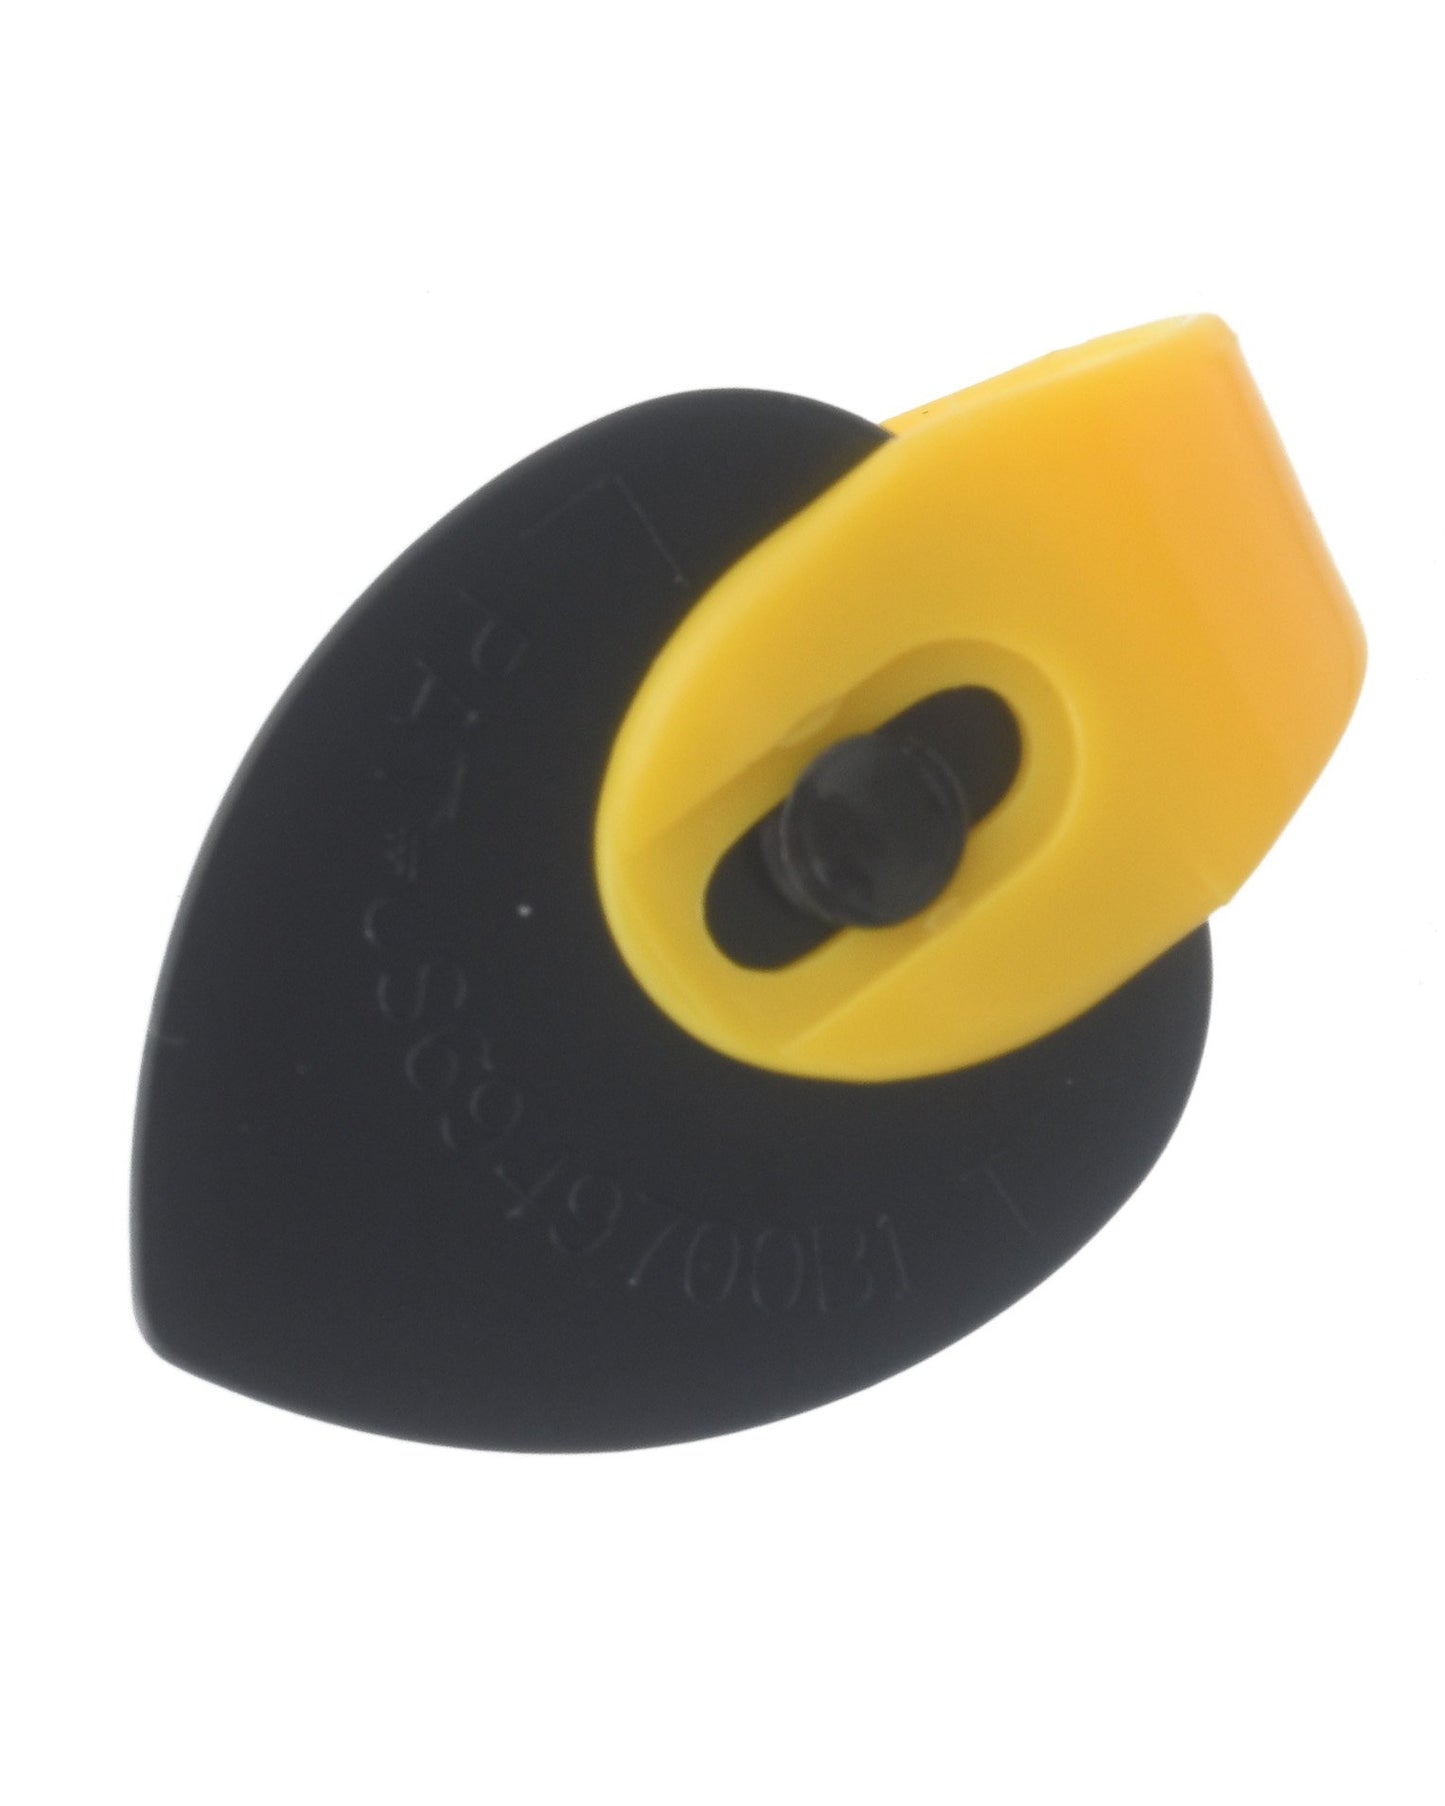 Image 1 of Fred Kelly Delrin Heavy Gauge Bumble Bee Teardrop Pick - SKU# PKBBT-H : Product Type Accessories & Parts : Elderly Instruments